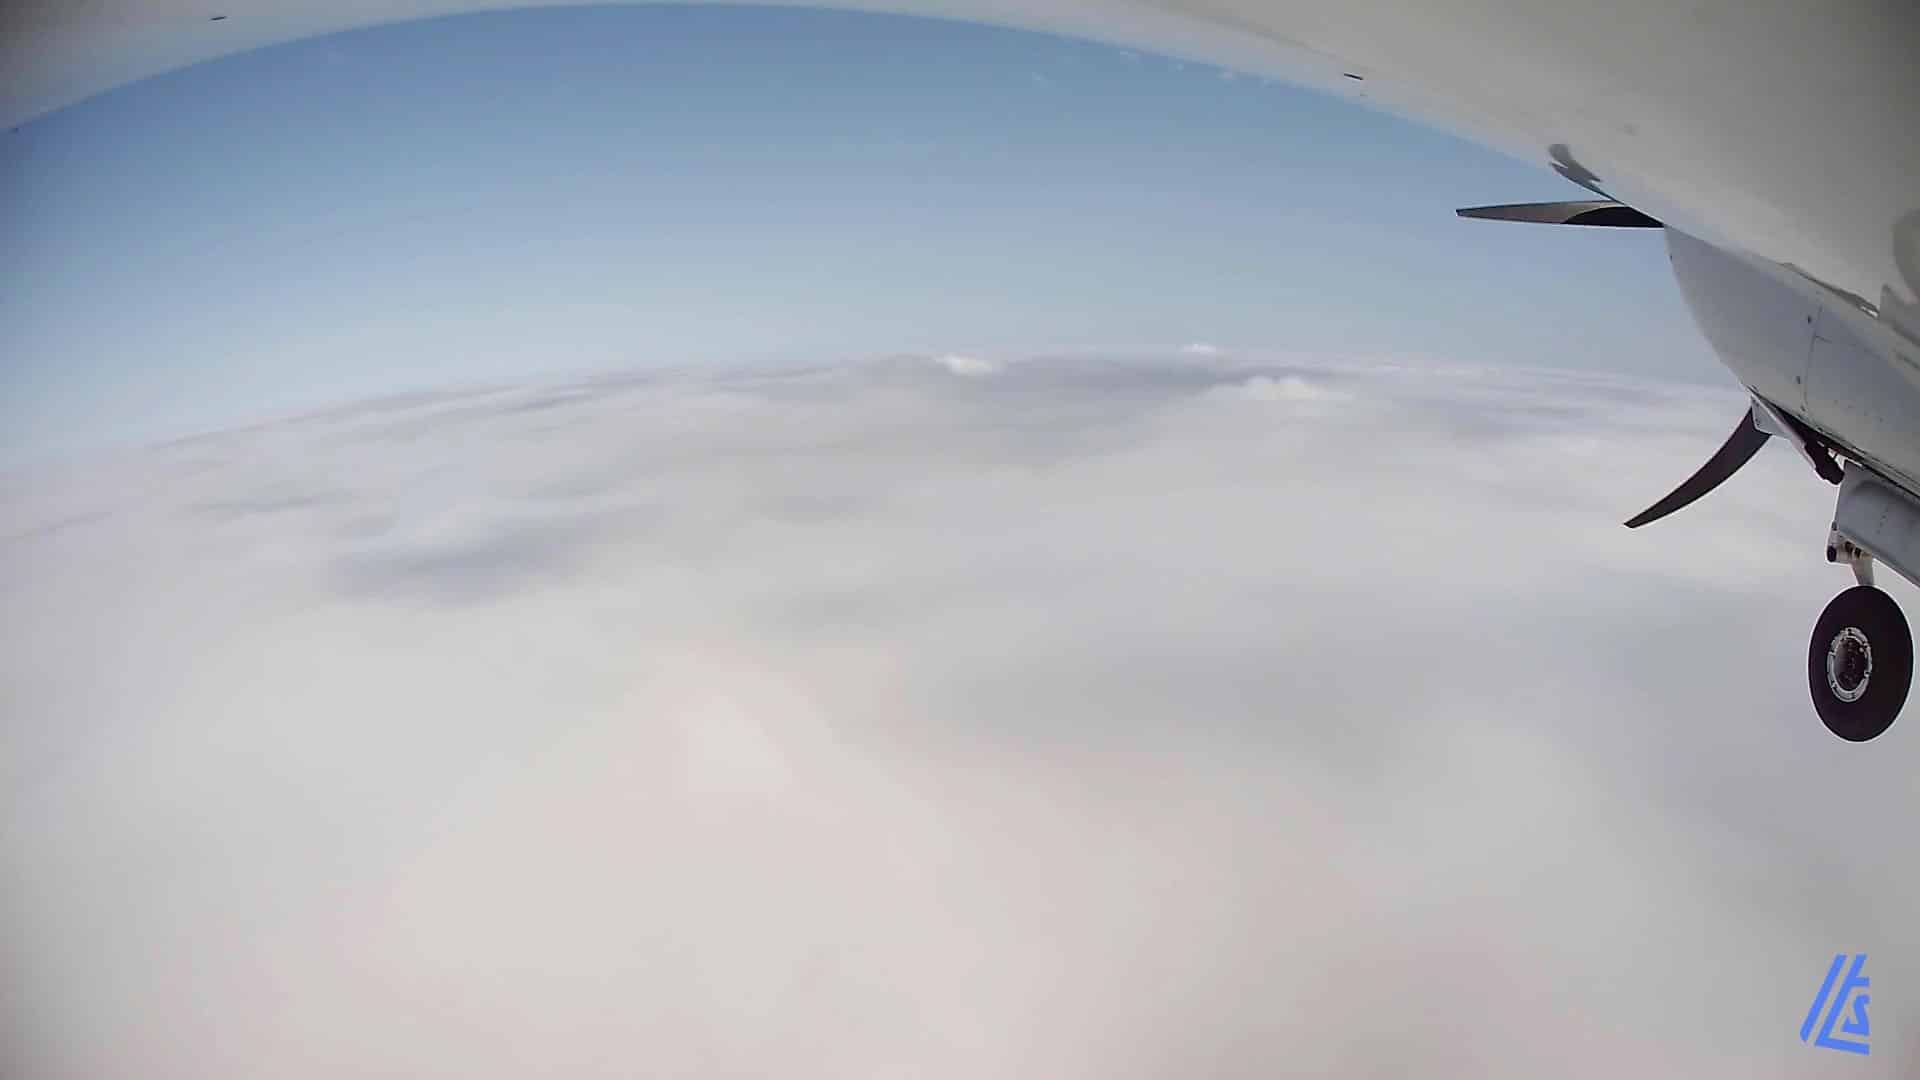 IFR Training – First Time in Actual IMC